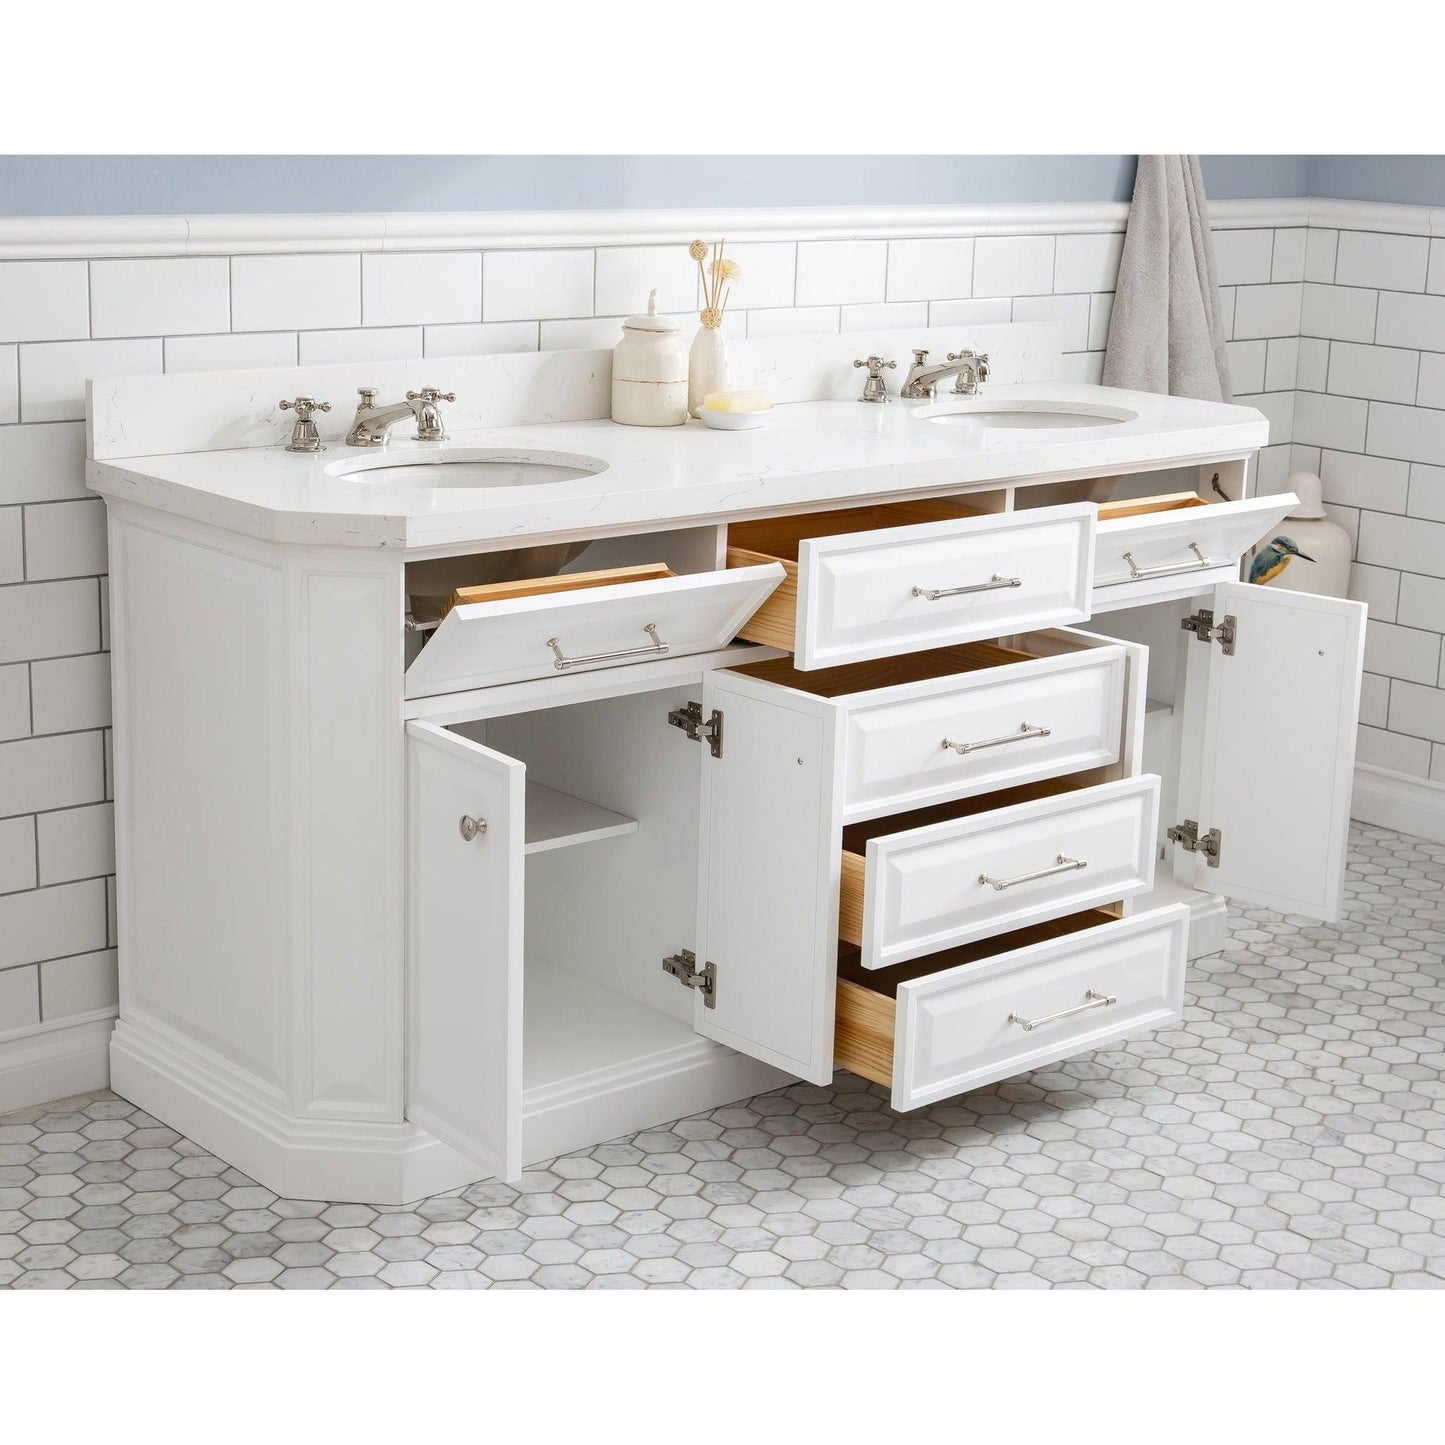 Water Creation Palace 72" Quartz Carrara Pure White Bathroom Vanity Set With Hardware in Polished Nickel (PVD) Finish